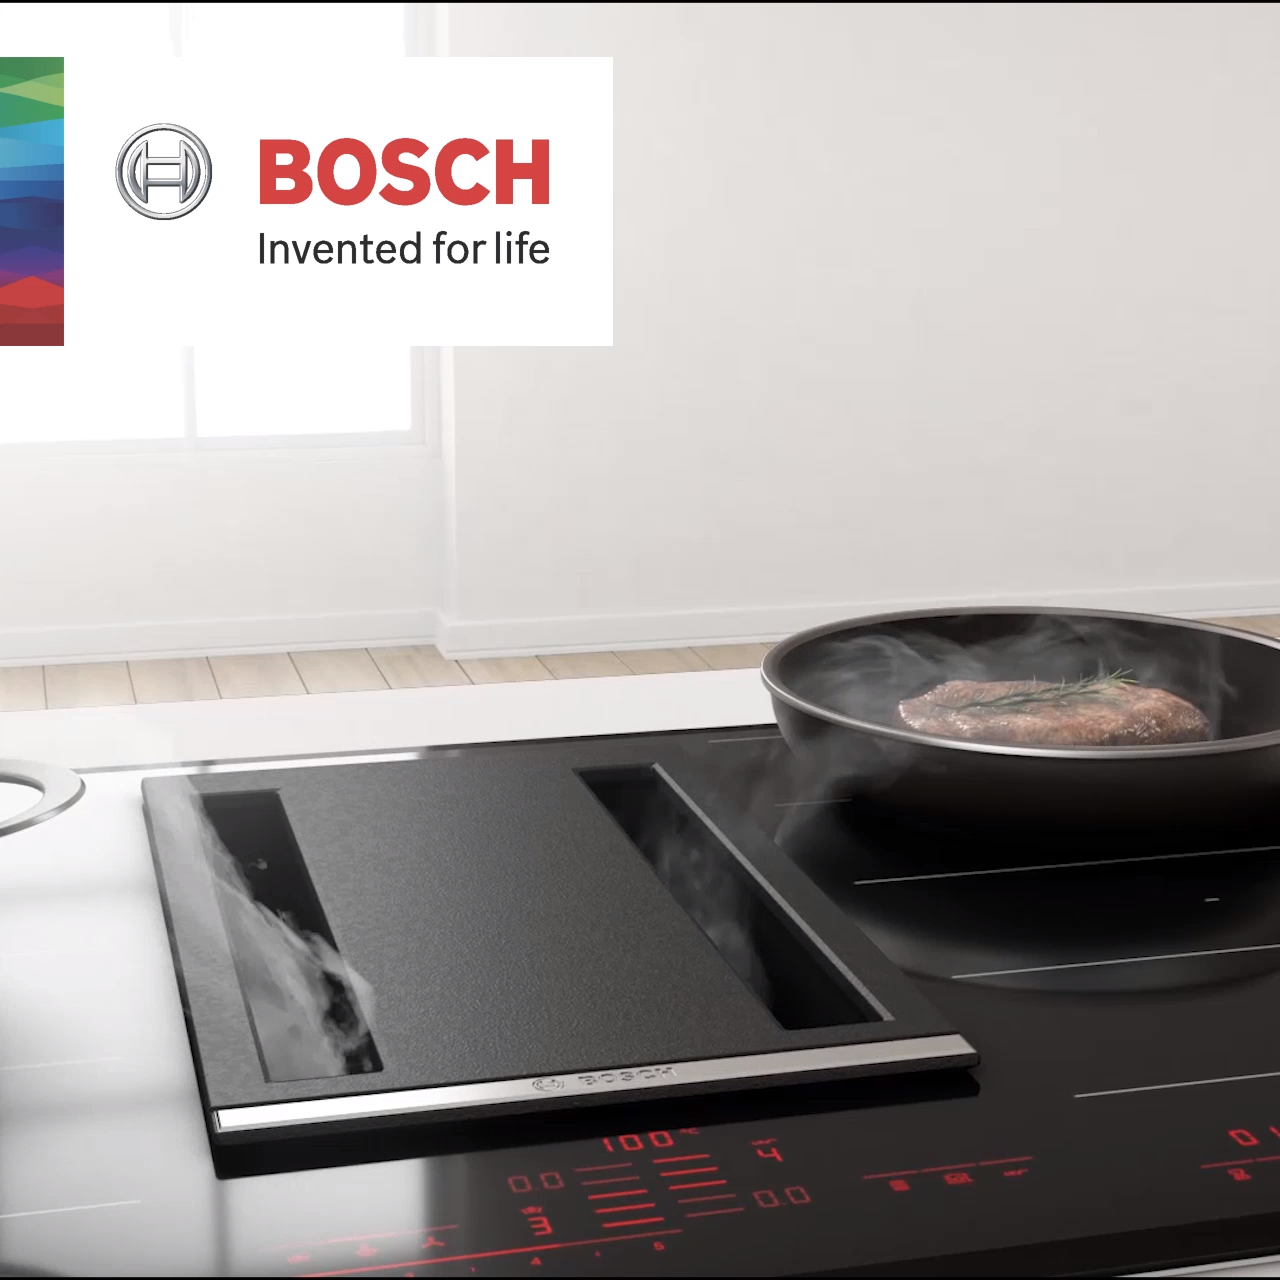 Bosch Venting Hob - Perfect for any kitchen -   16 fitness Interior space saving ideas